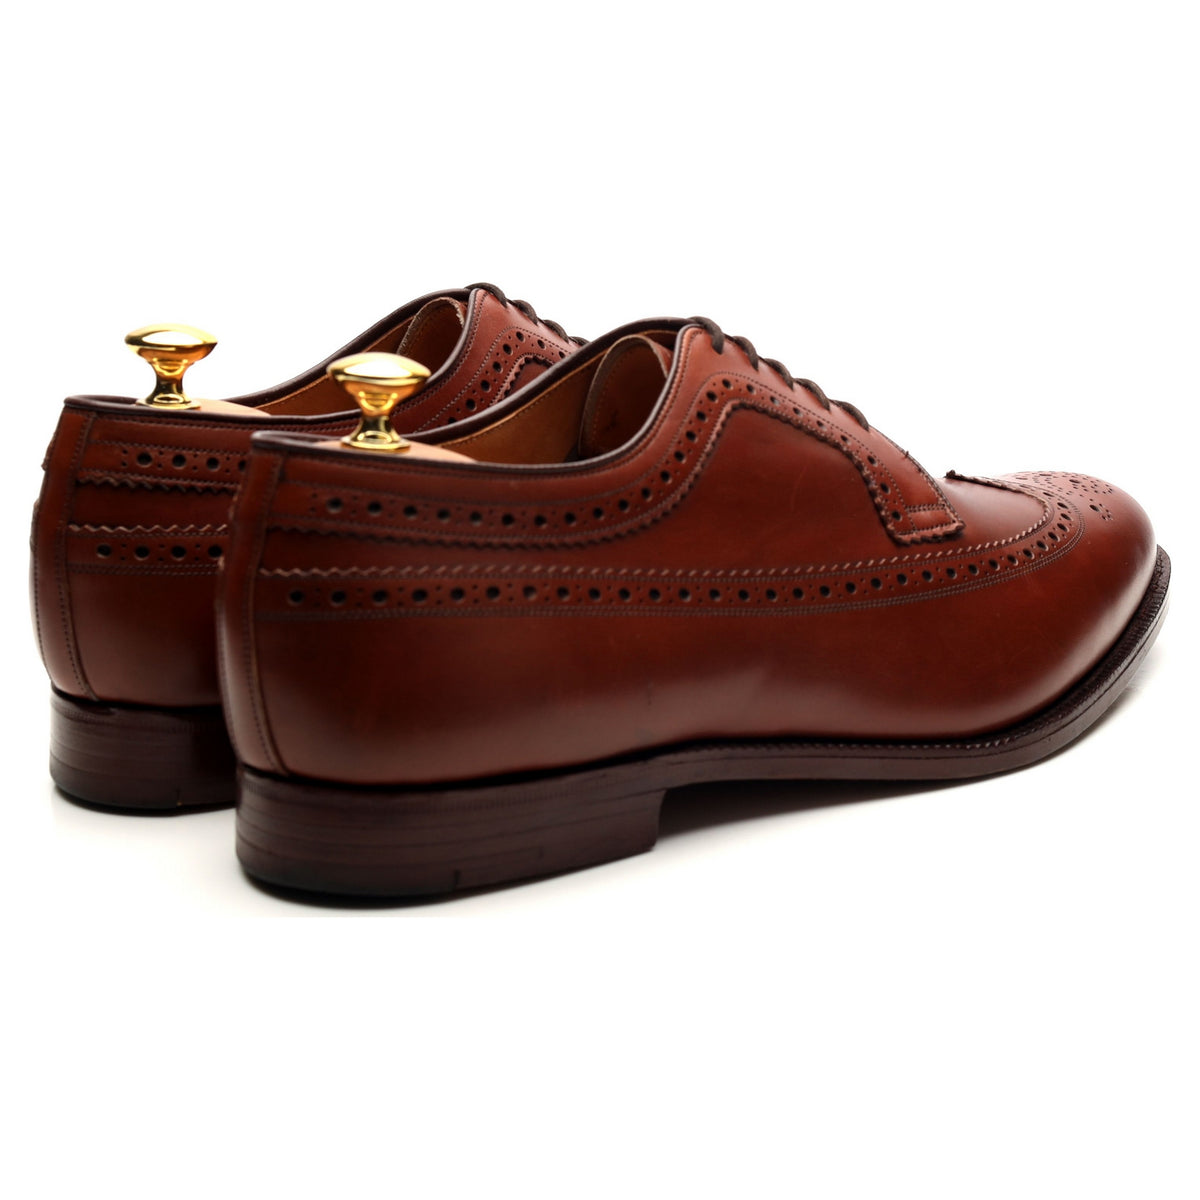 &#39;Aden&#39; Tan Brown Leather Derby Brogues UK 11.5 G